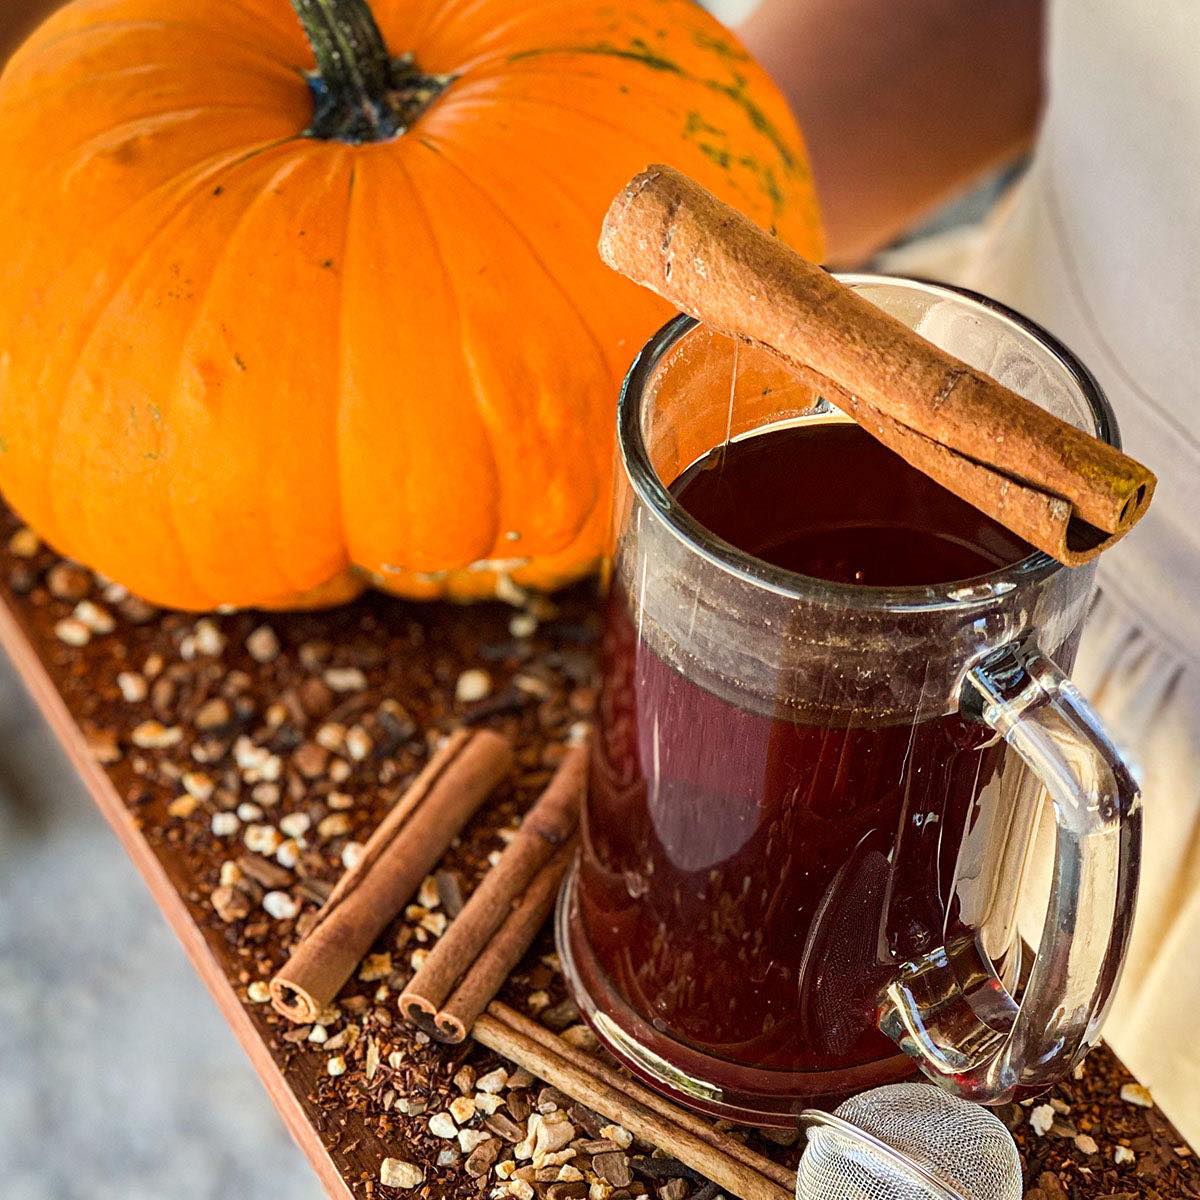 A brewed mug of creamy pumpkin pie tea rests on a wooden surface with cinnamon sticks and sprinkled dried tea. A pumpkin is in the background.